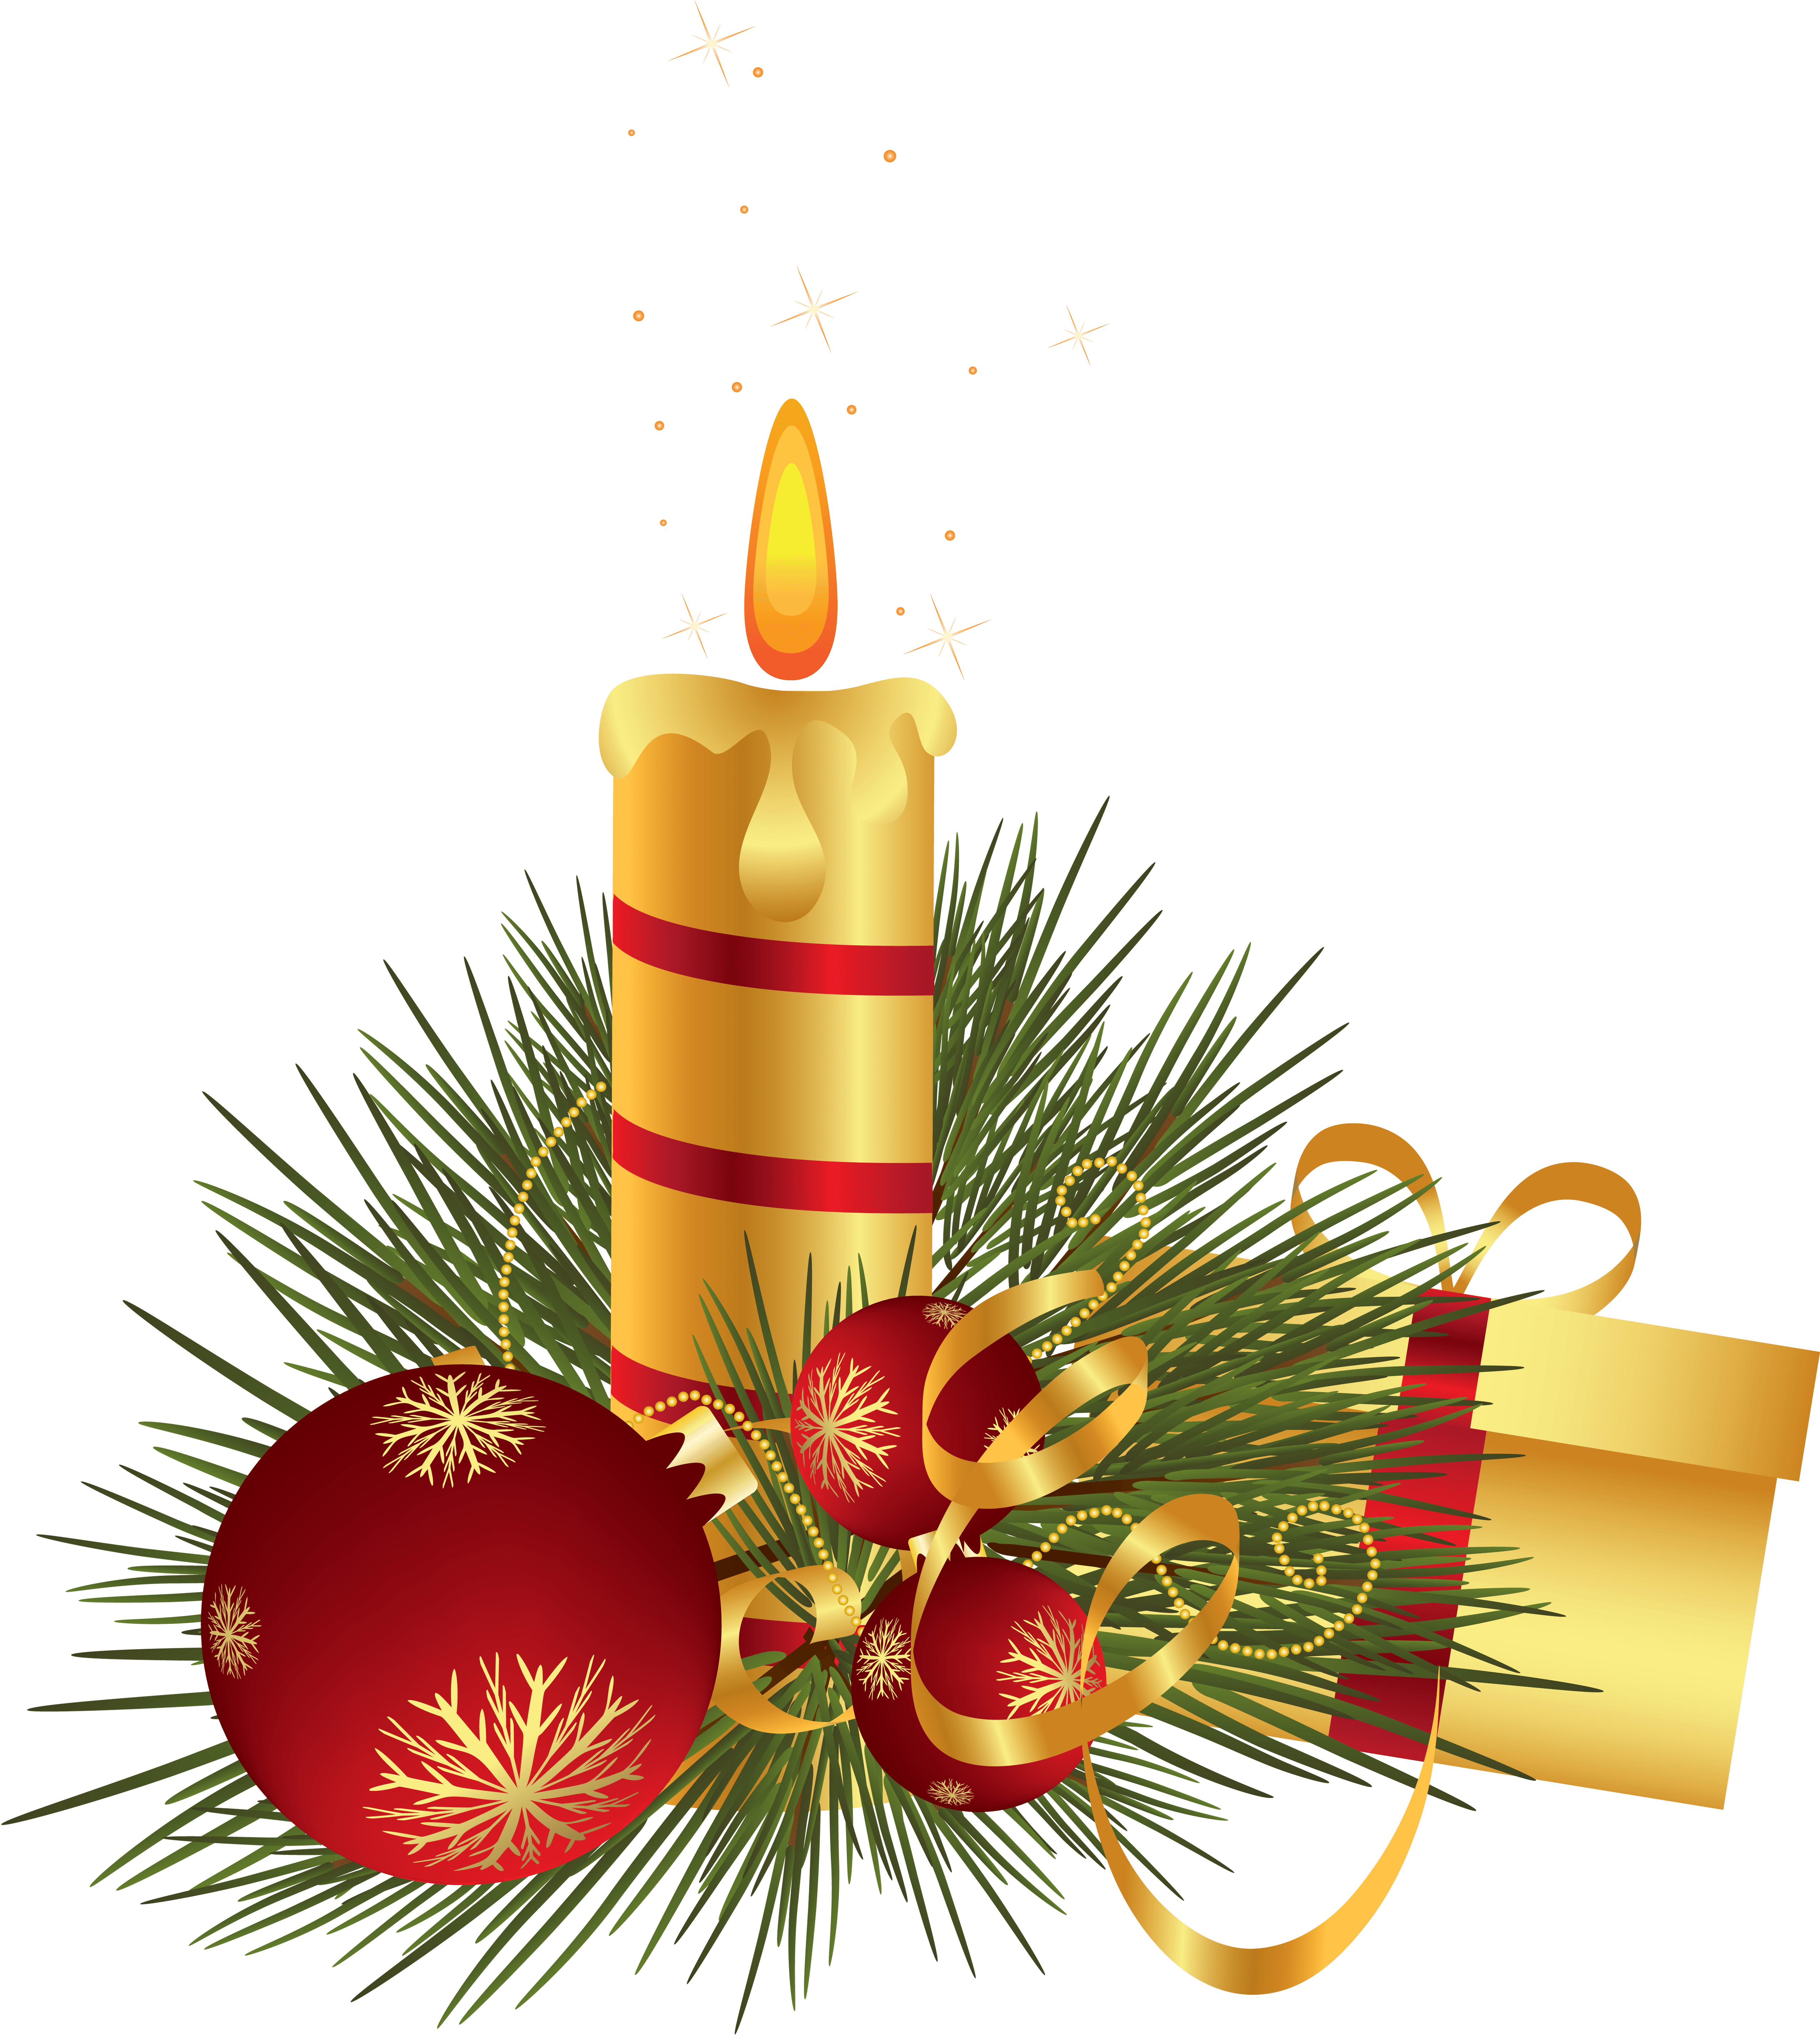 Free Christmas Candles Clipart, Download Free Clip Art, Free Clip